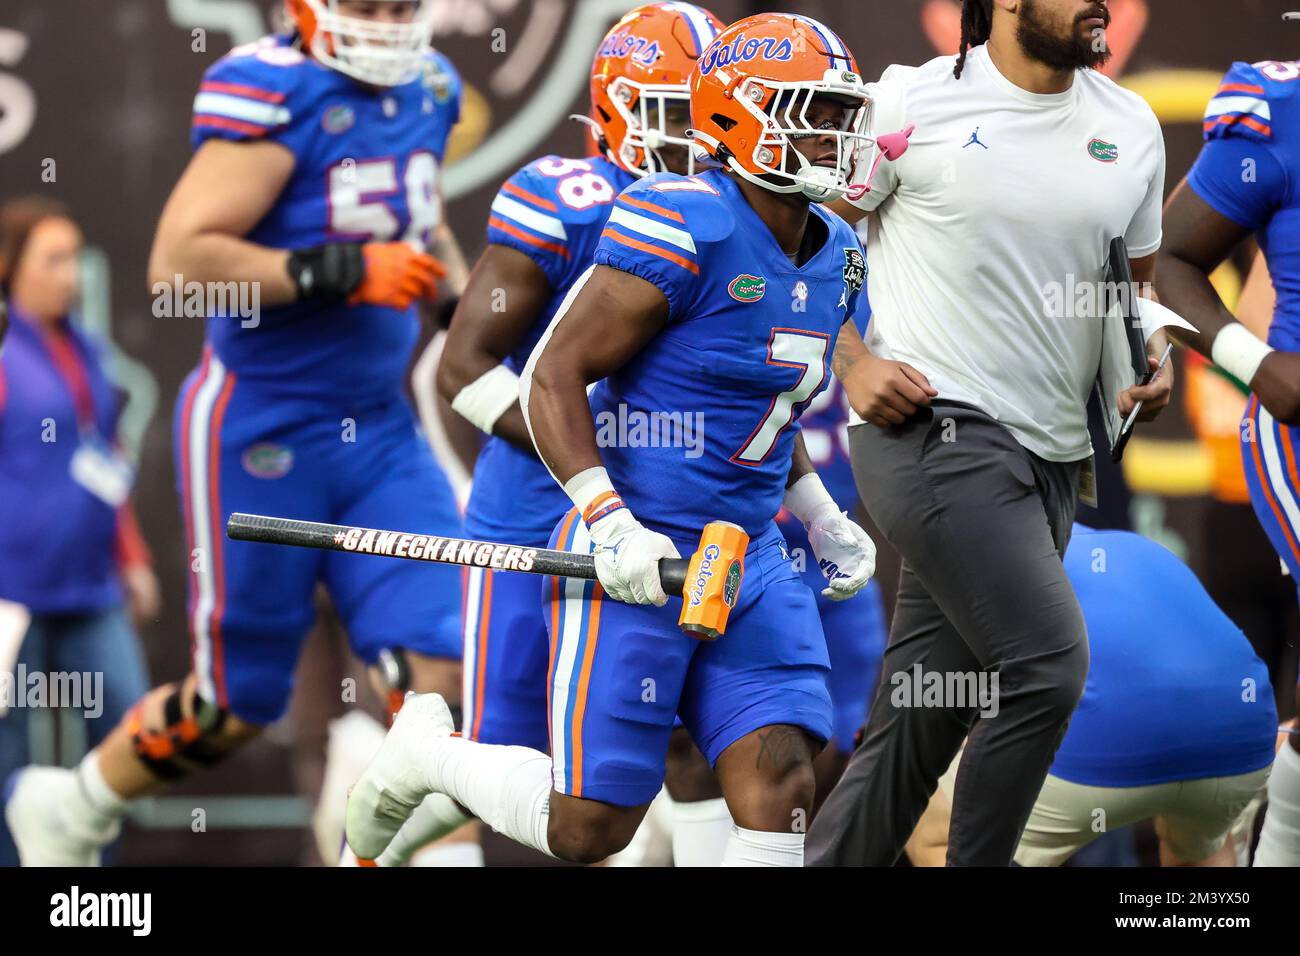 Las Vegas, NV, USA. 17th Dec, 2022. Florida Gators running back Trevor Etienne (7) runs onto the field prior to the start of the SRS Distribution Las Vegas Bowl featuring the Florida Gators and the Oregon State Beavers at Allegiant Stadium in Las Vegas, NV. Christopher Trim/CSM/Alamy Live News Stock Photo